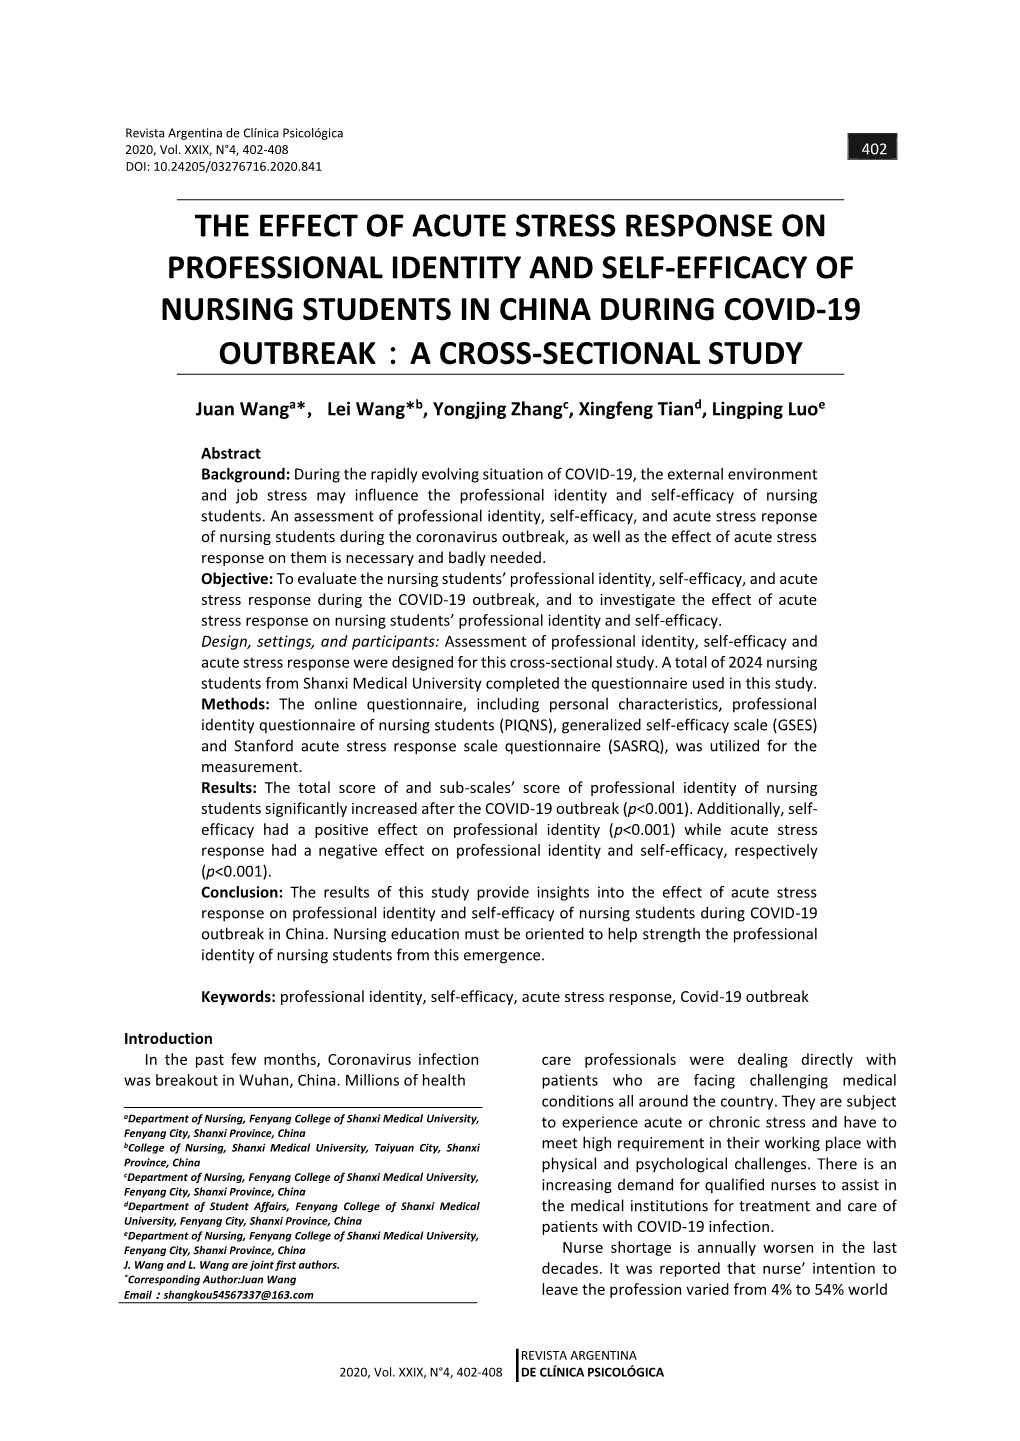 The Effect of Acute Stress Response on Professional Identity and Self-Efficacy of Nursing Students in China During Covid-19 Outbreak：A Cross-Sectional Study